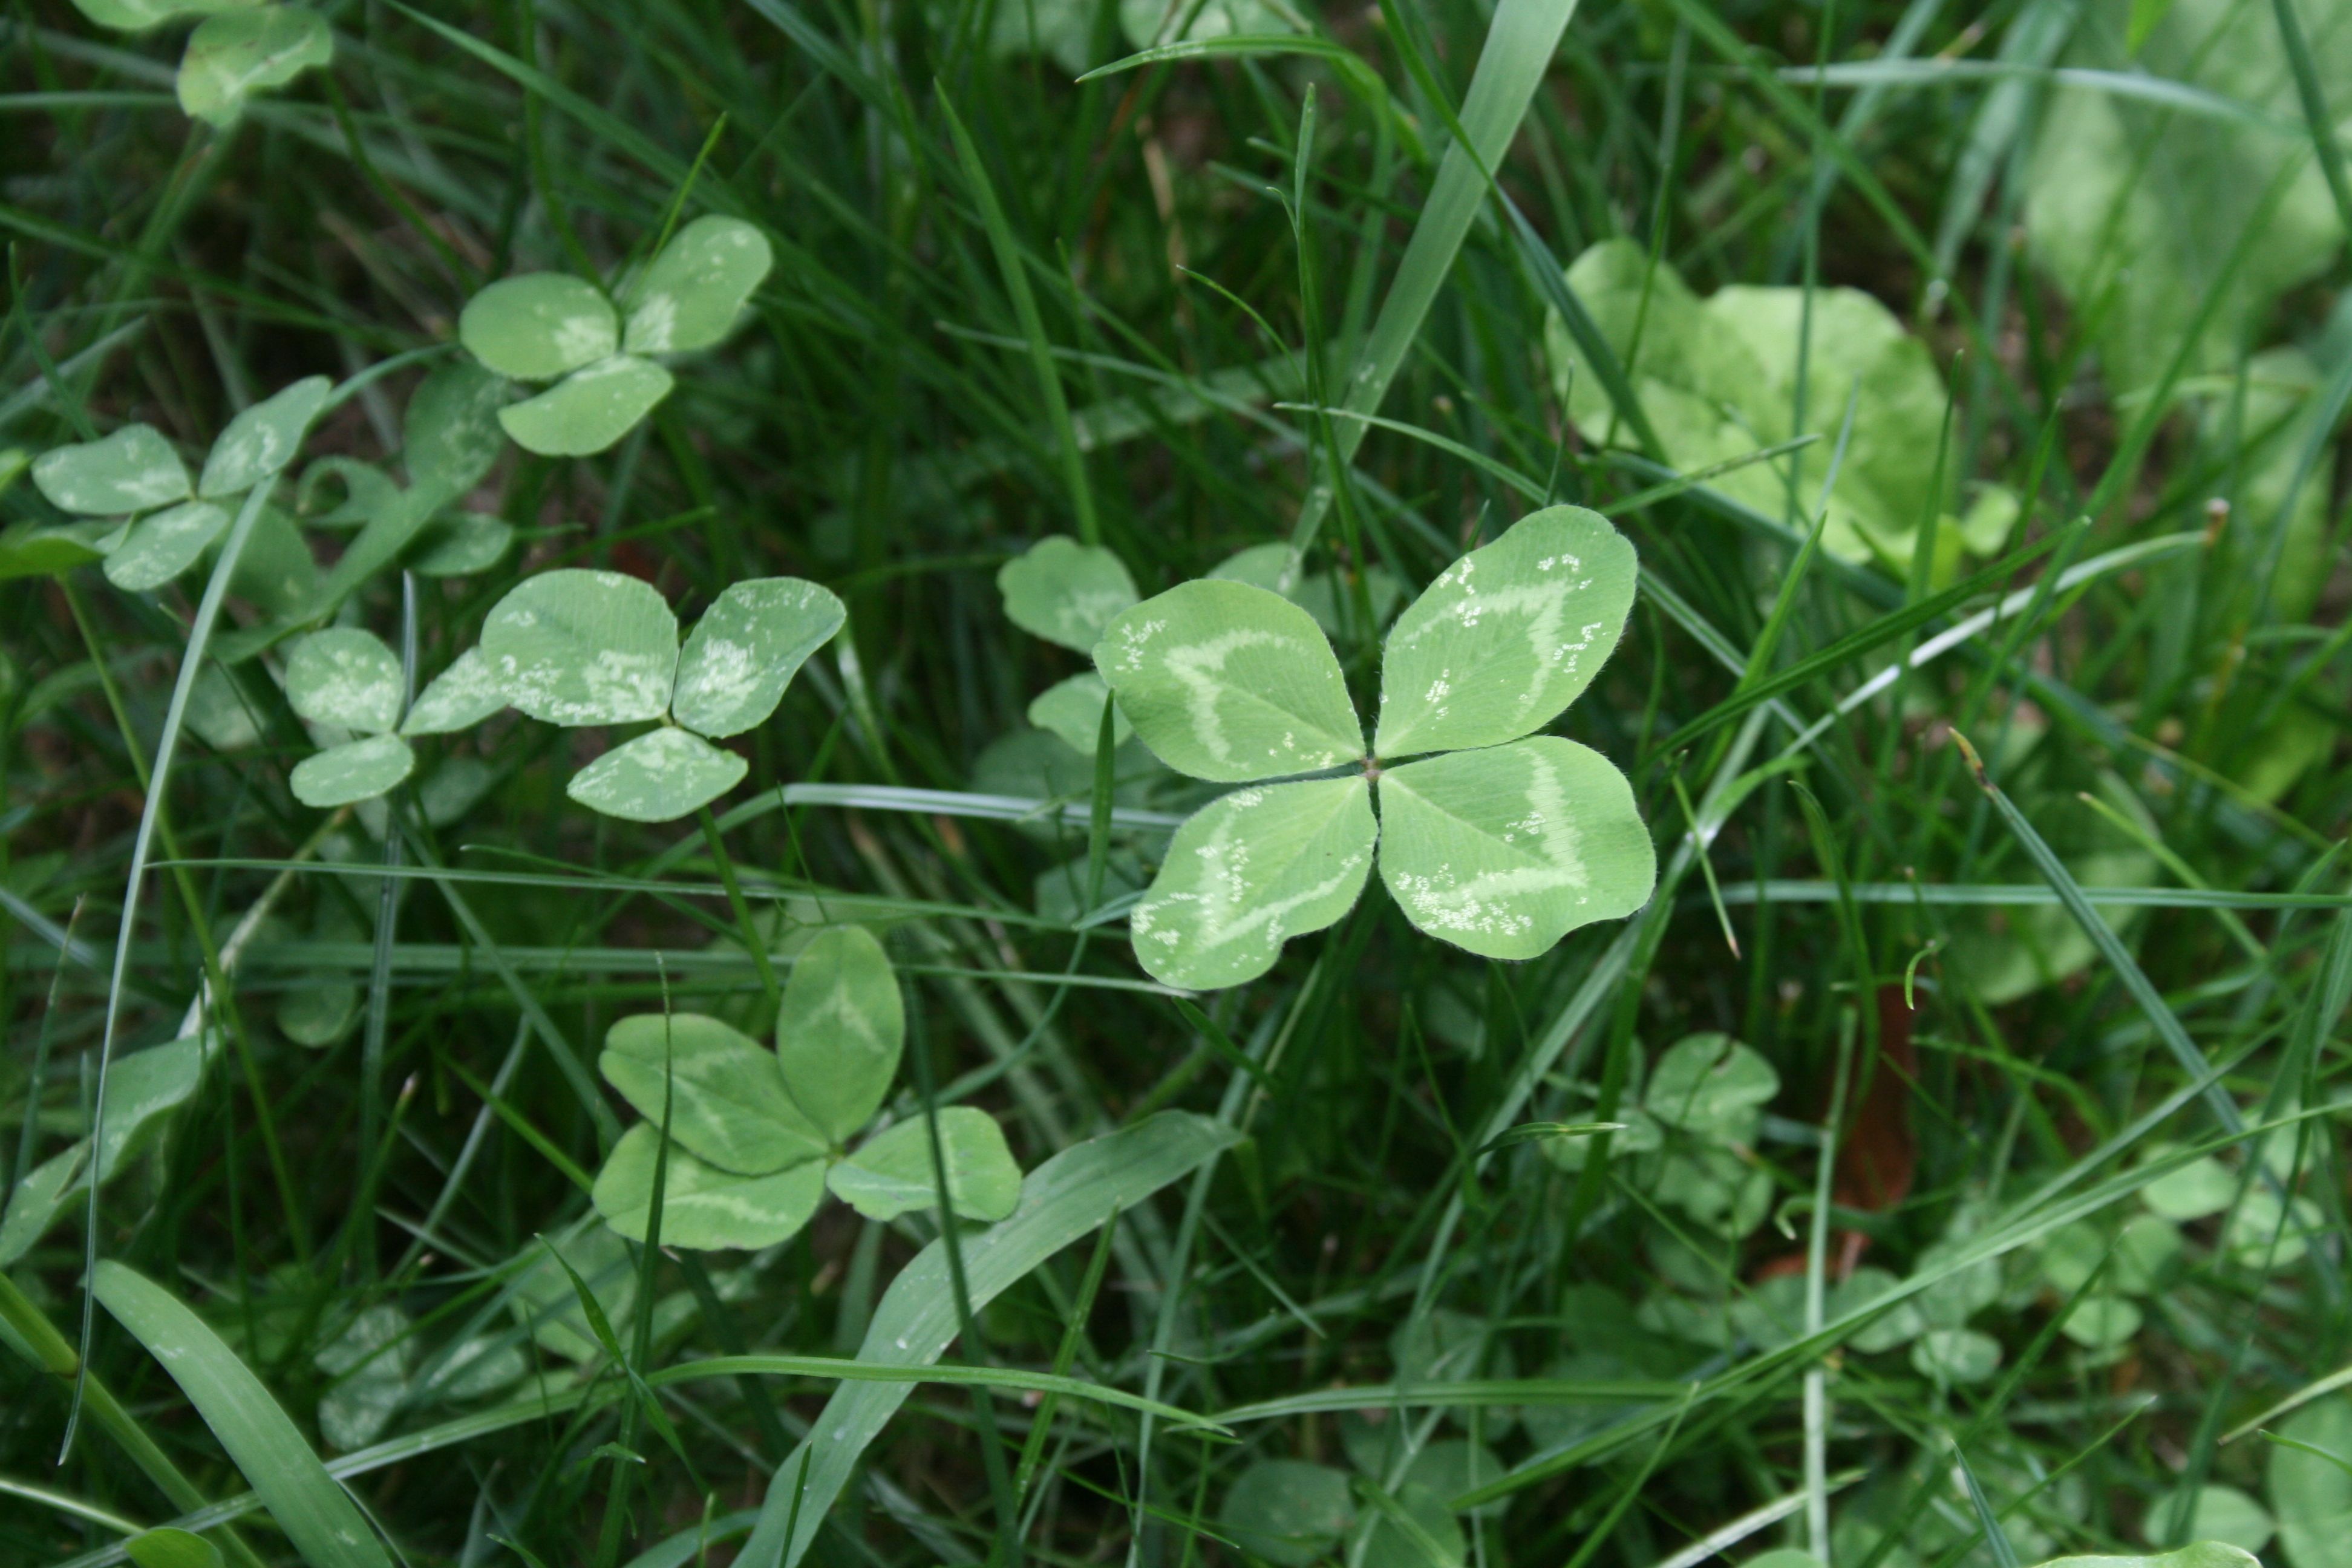 Why Are Four-Leaf Clovers Considered Lucky?